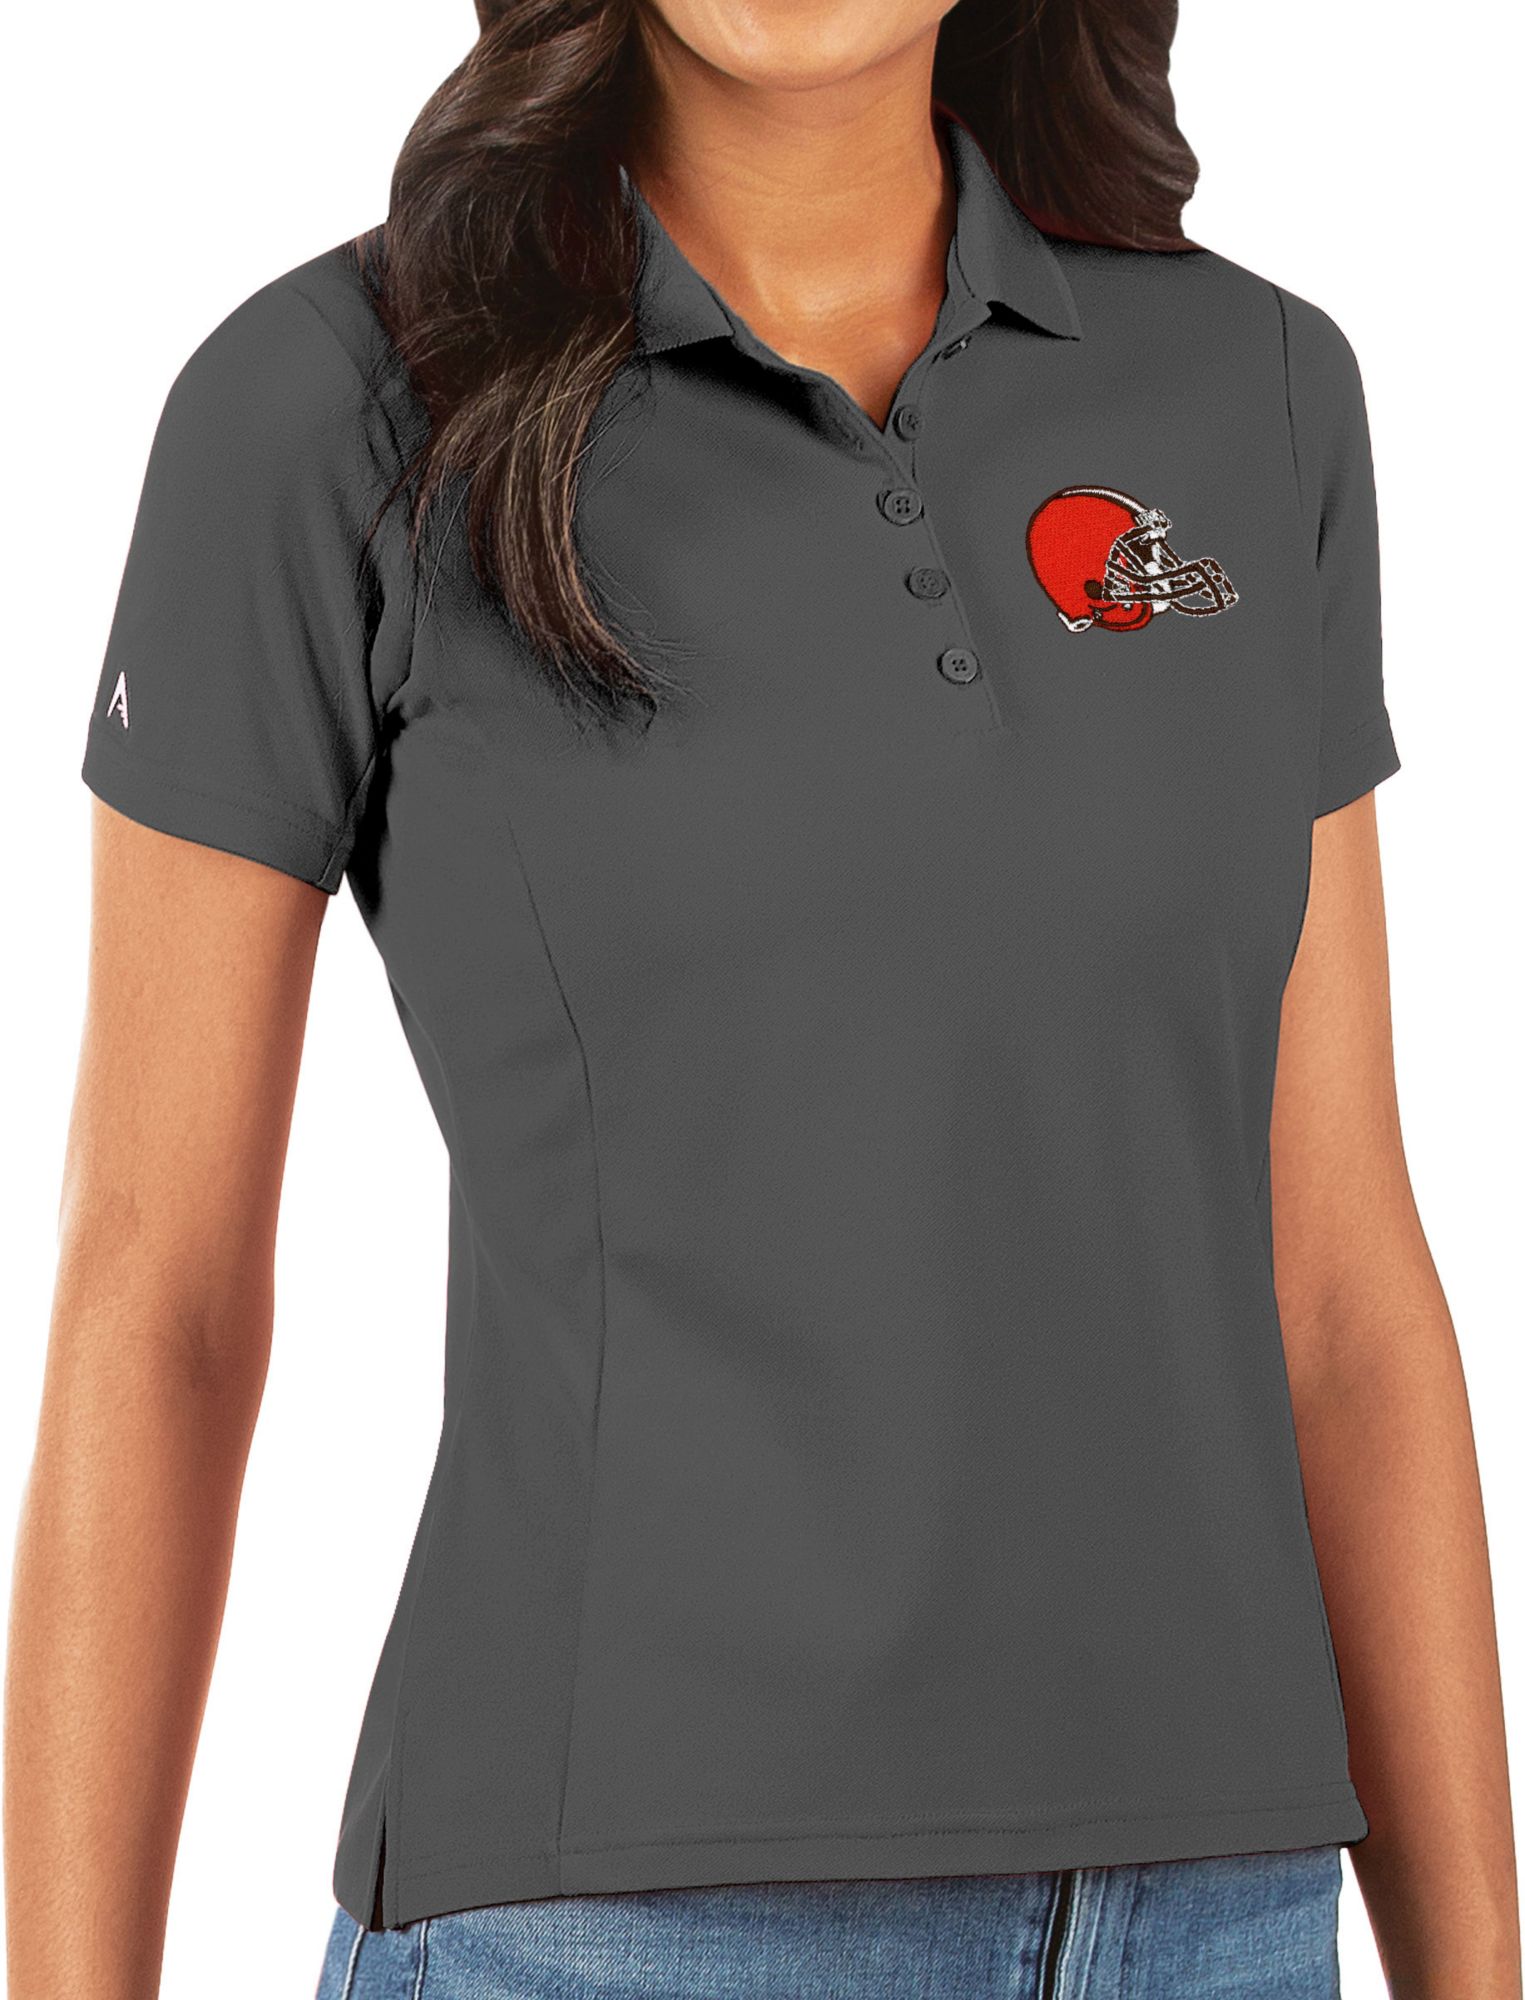 cleveland browns apparel for women